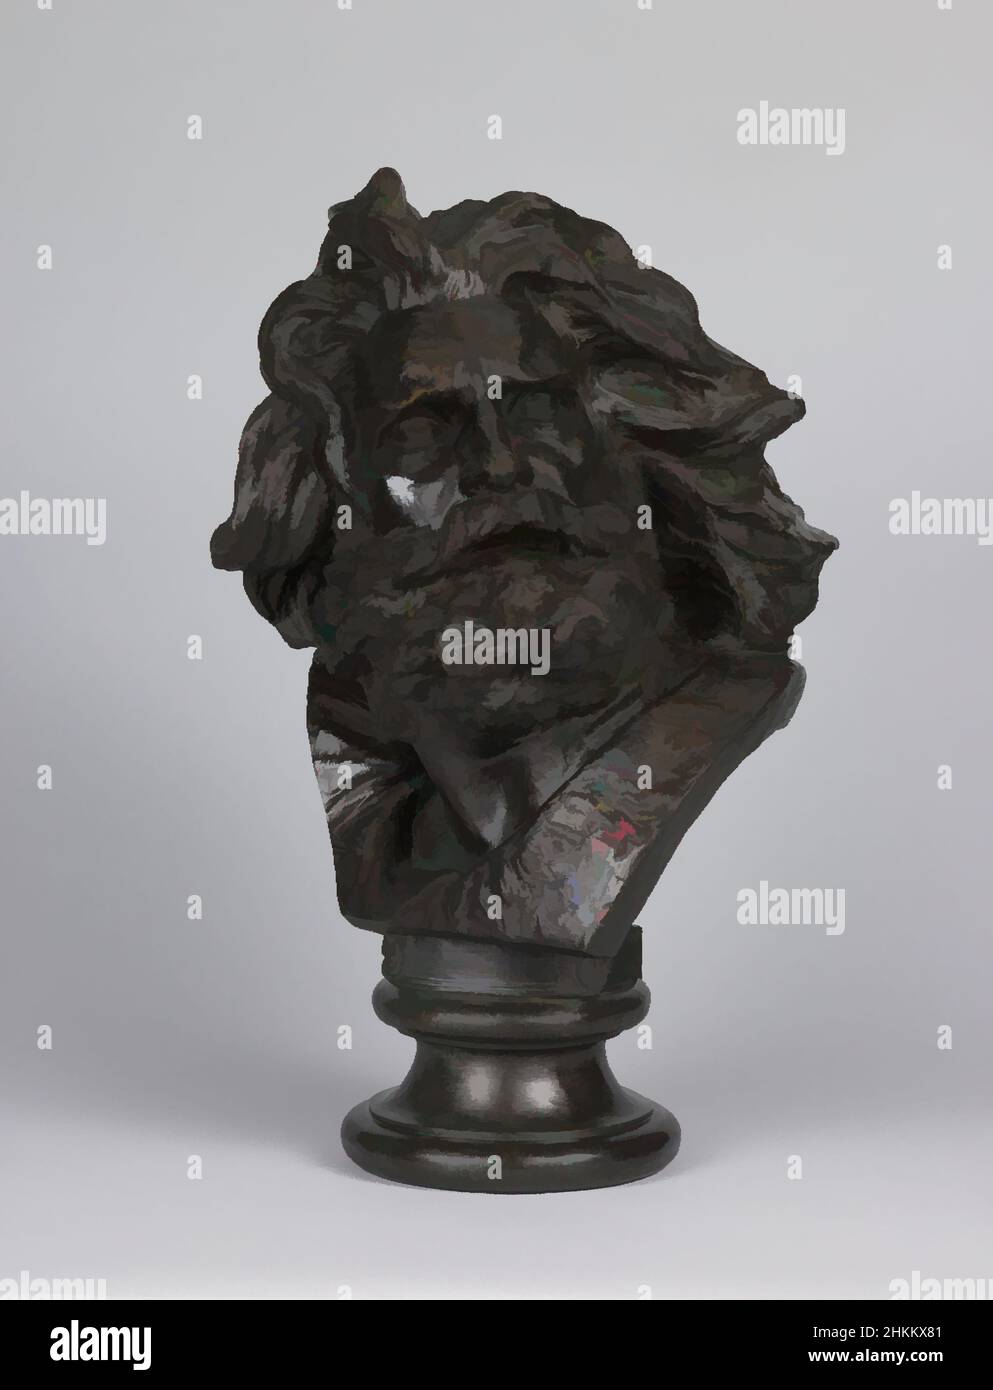 Art inspired by Head of a Gaul, François Rude, French, 1784-1855, c.1833-35, Bronze, Metalwork, sculpture, 24 1/2 x 12 3/4 x 12 1/4 in. (62.2 x 32.4 x 31.1 cm, Classic works modernized by Artotop with a splash of modernity. Shapes, color and value, eye-catching visual impact on art. Emotions through freedom of artworks in a contemporary way. A timeless message pursuing a wildly creative new direction. Artists turning to the digital medium and creating the Artotop NFT Stock Photo